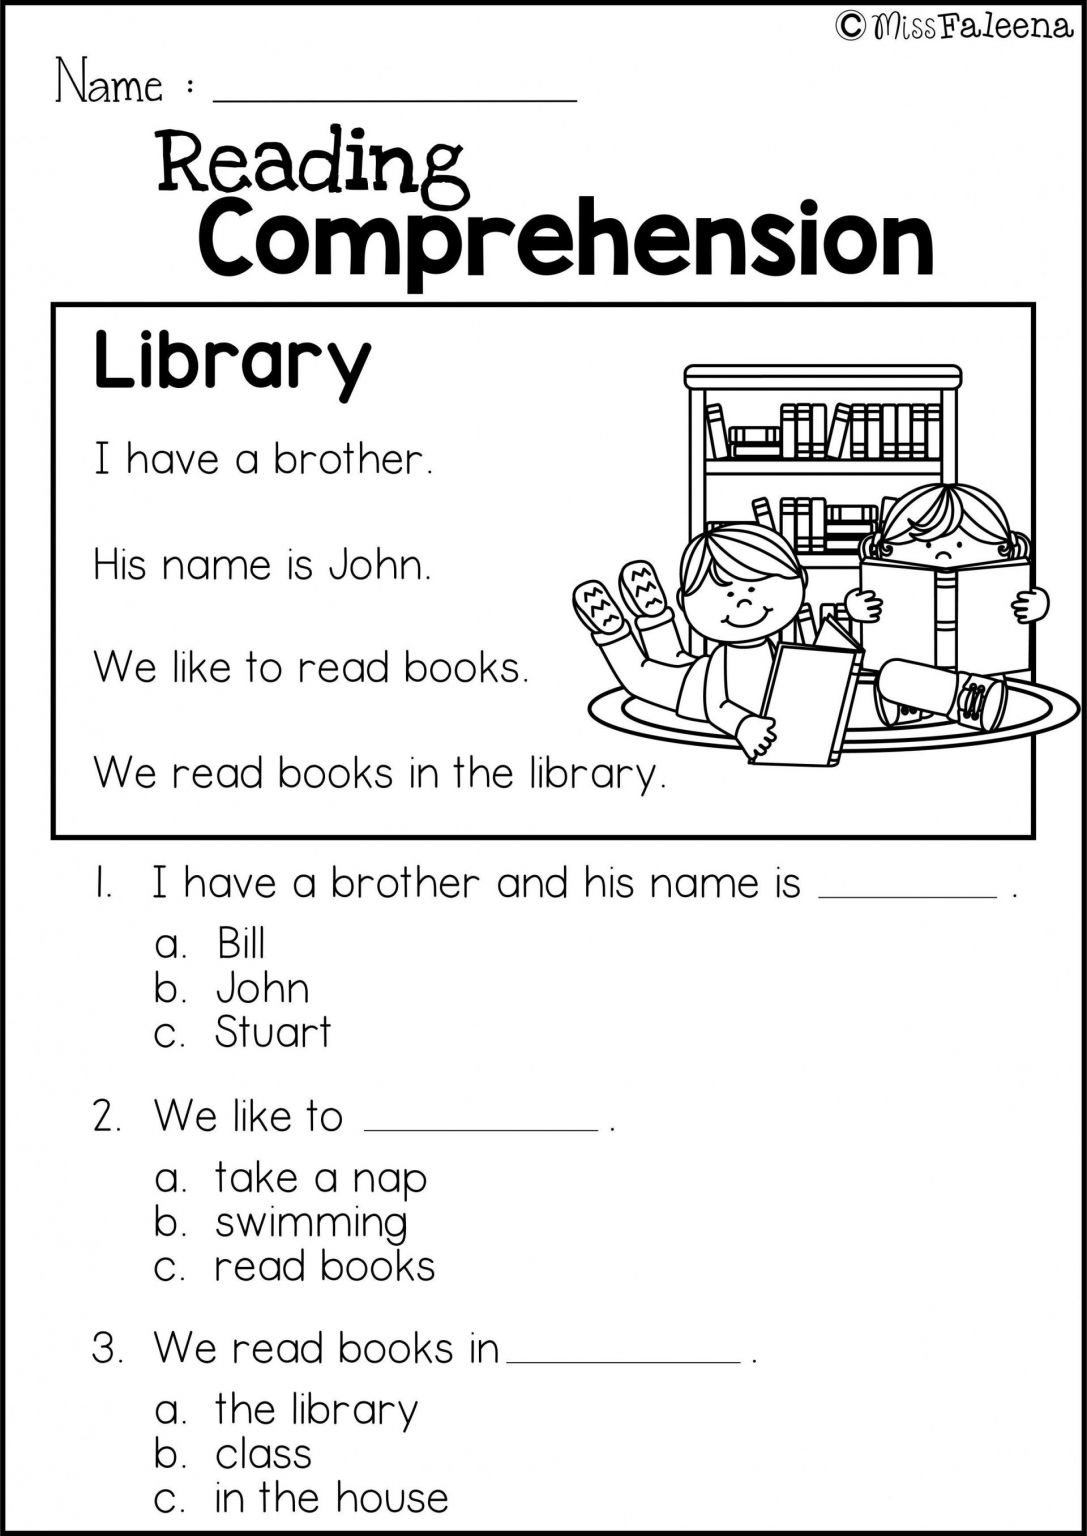 4-free-math-worksheets-first-grade-1-subtraction-subtract-2-digit-numbers-no-regrouping-amp